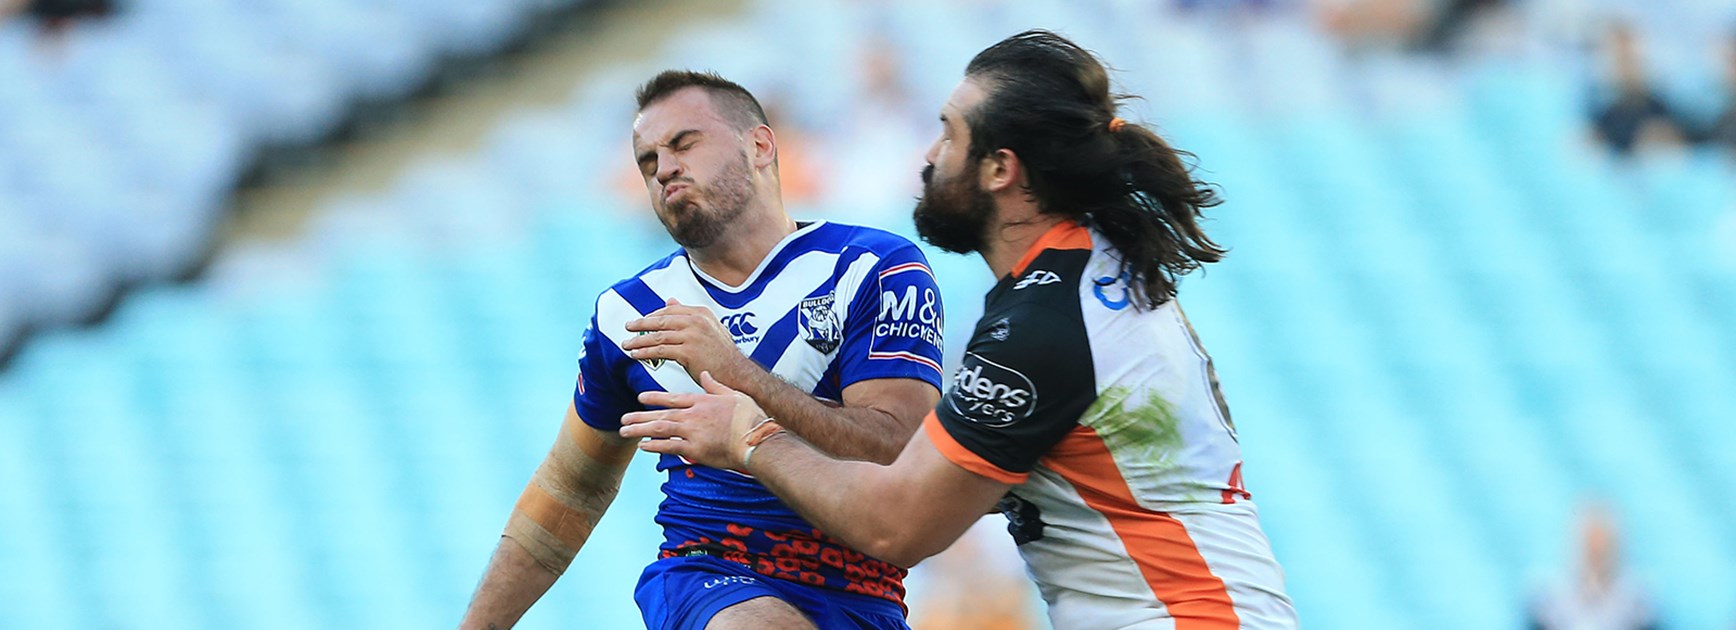 Wests Tigers recruit Josh Reynolds and new Bulldogs prop Aaron Woods are set to face off in Round 12 in 2018.